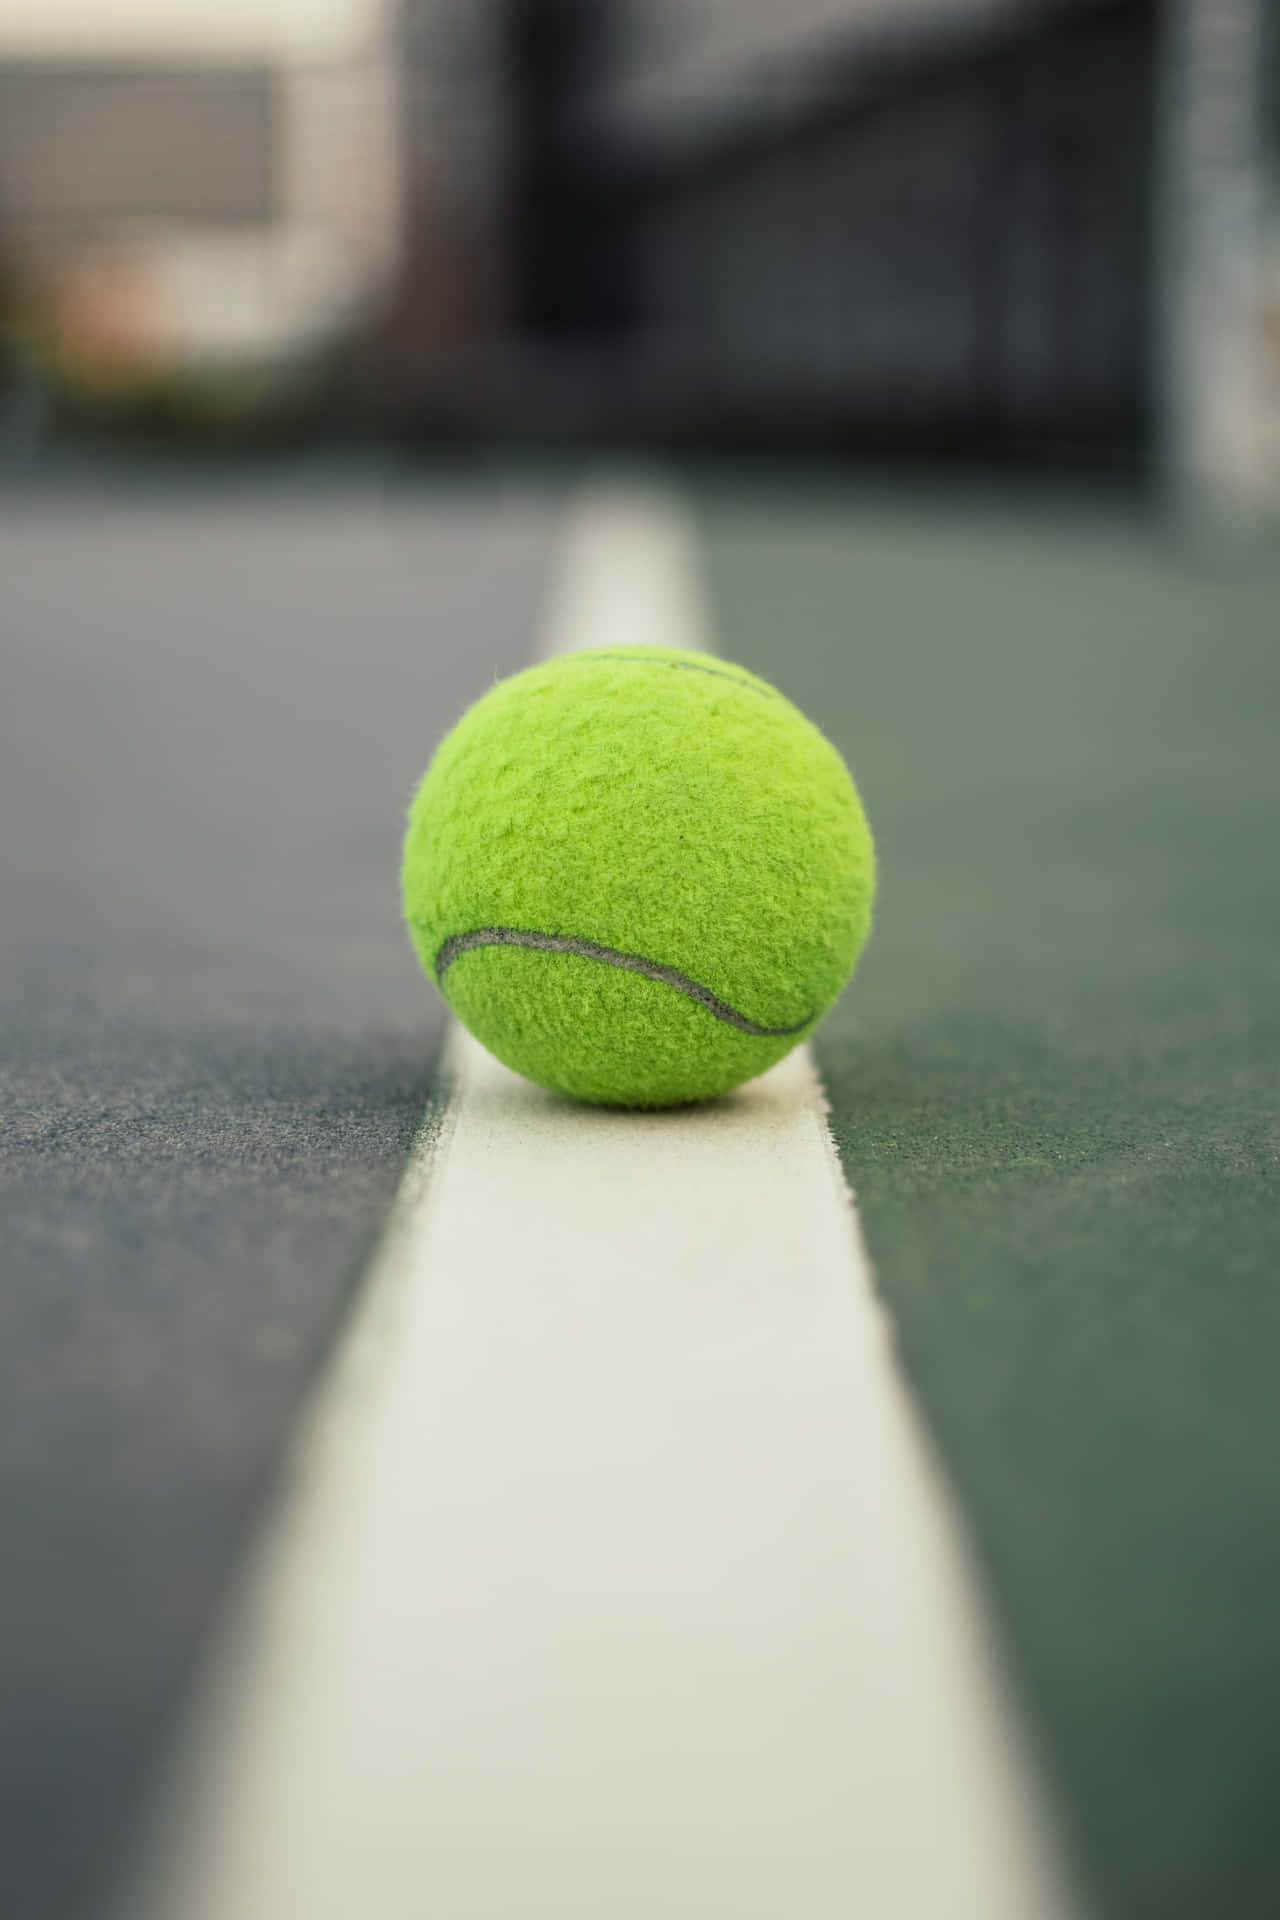 Speed, Skill and Power - The Essential Elements of a Great Tennis Match Wallpaper